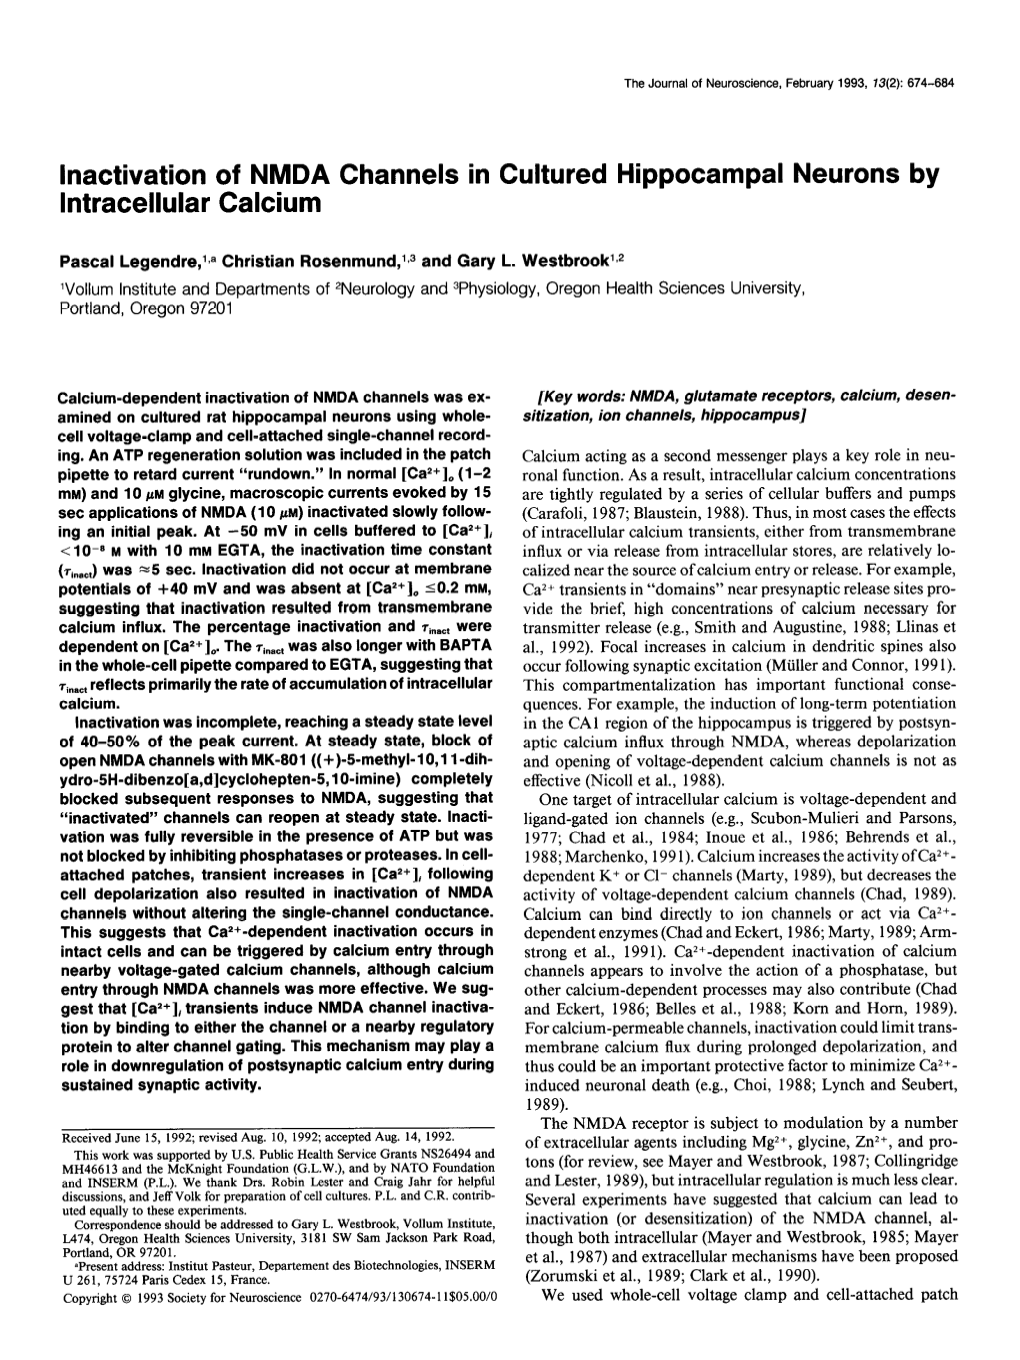 Inactivation of NMDA Channels in Cultured Hippocampal Neurons by Intracellular Calcium